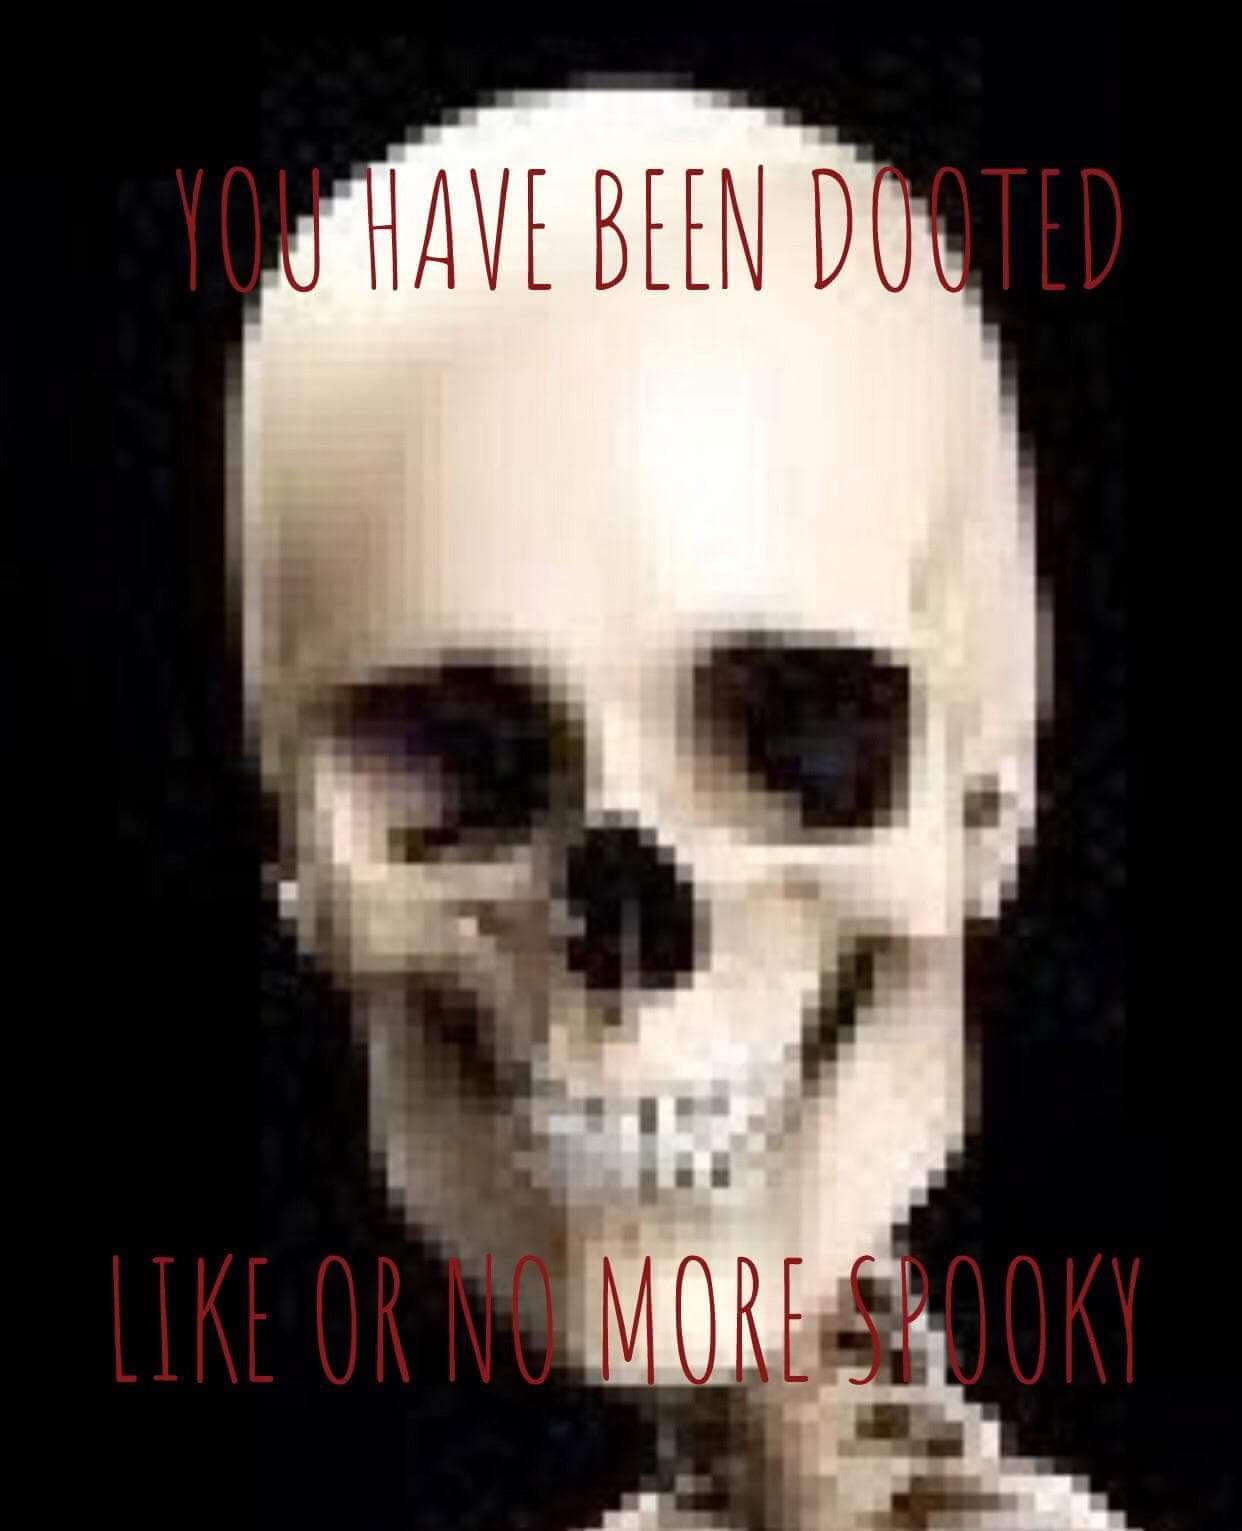 skeleton memes - You Have Been Ducted Or Ivo More